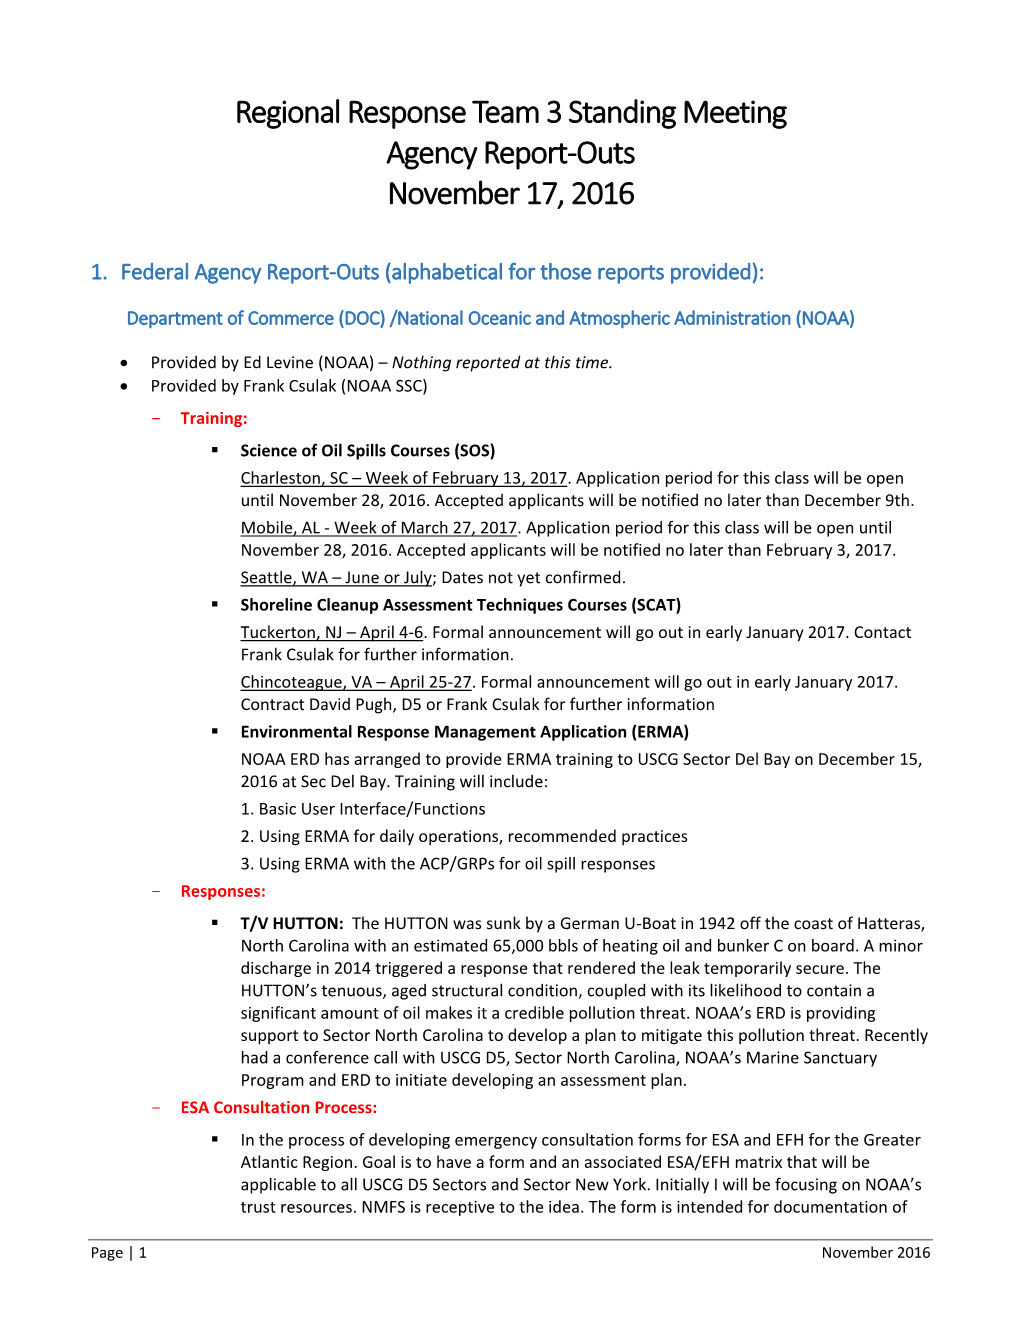 Regional Response Team 3 Standing Meeting Agency Report-Outs November 17, 2016